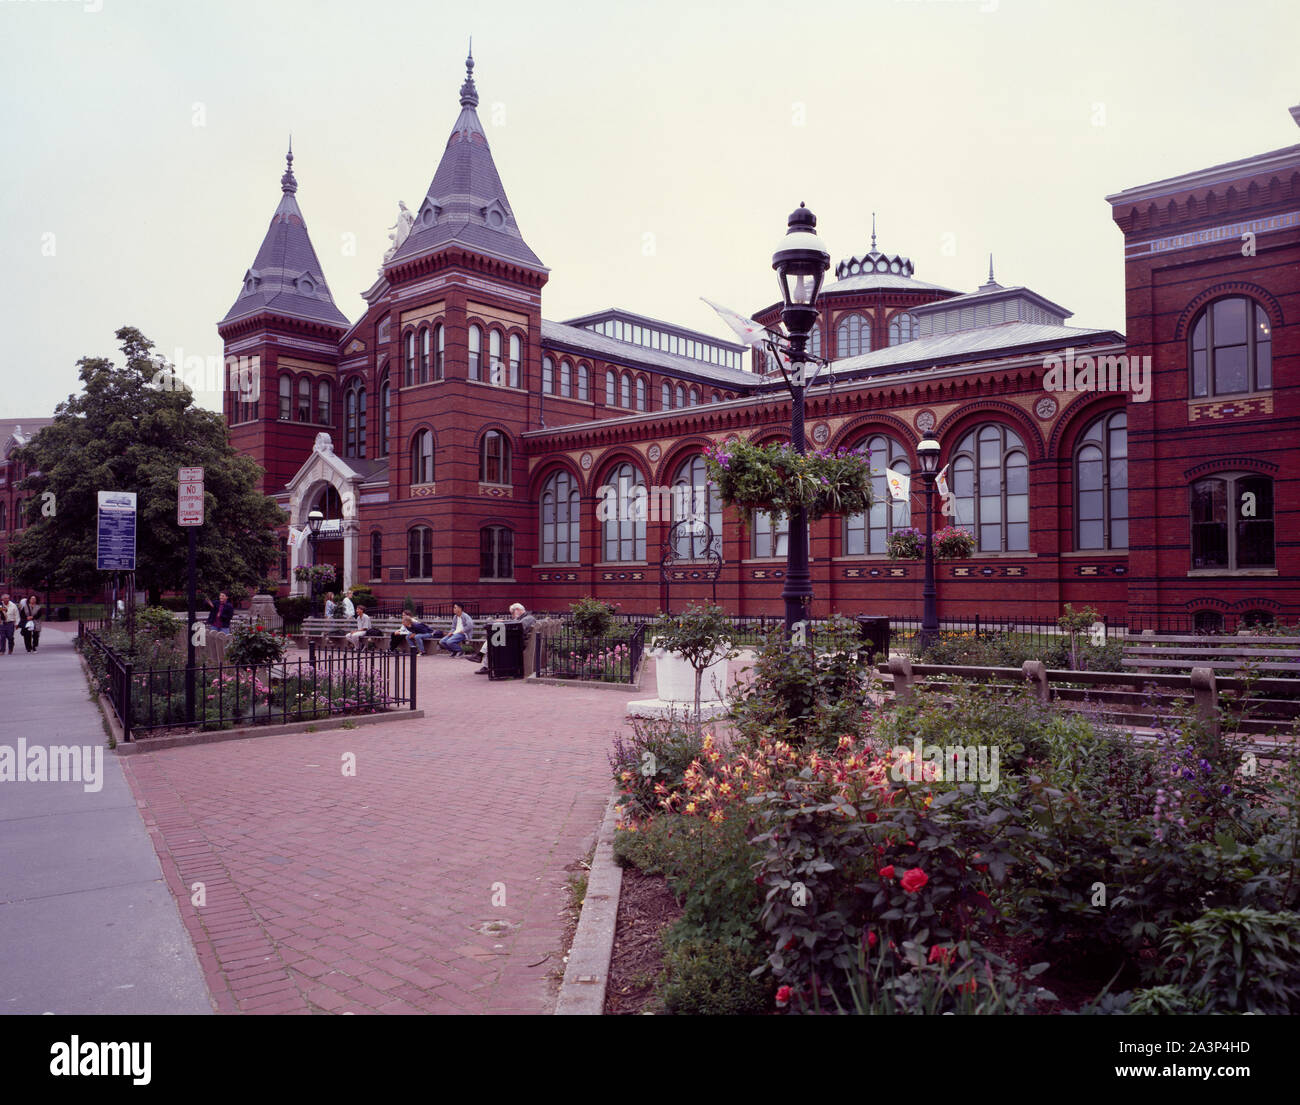 Smithsonian Institution's Arts and Industries building, Washington, D.C Stock Photo